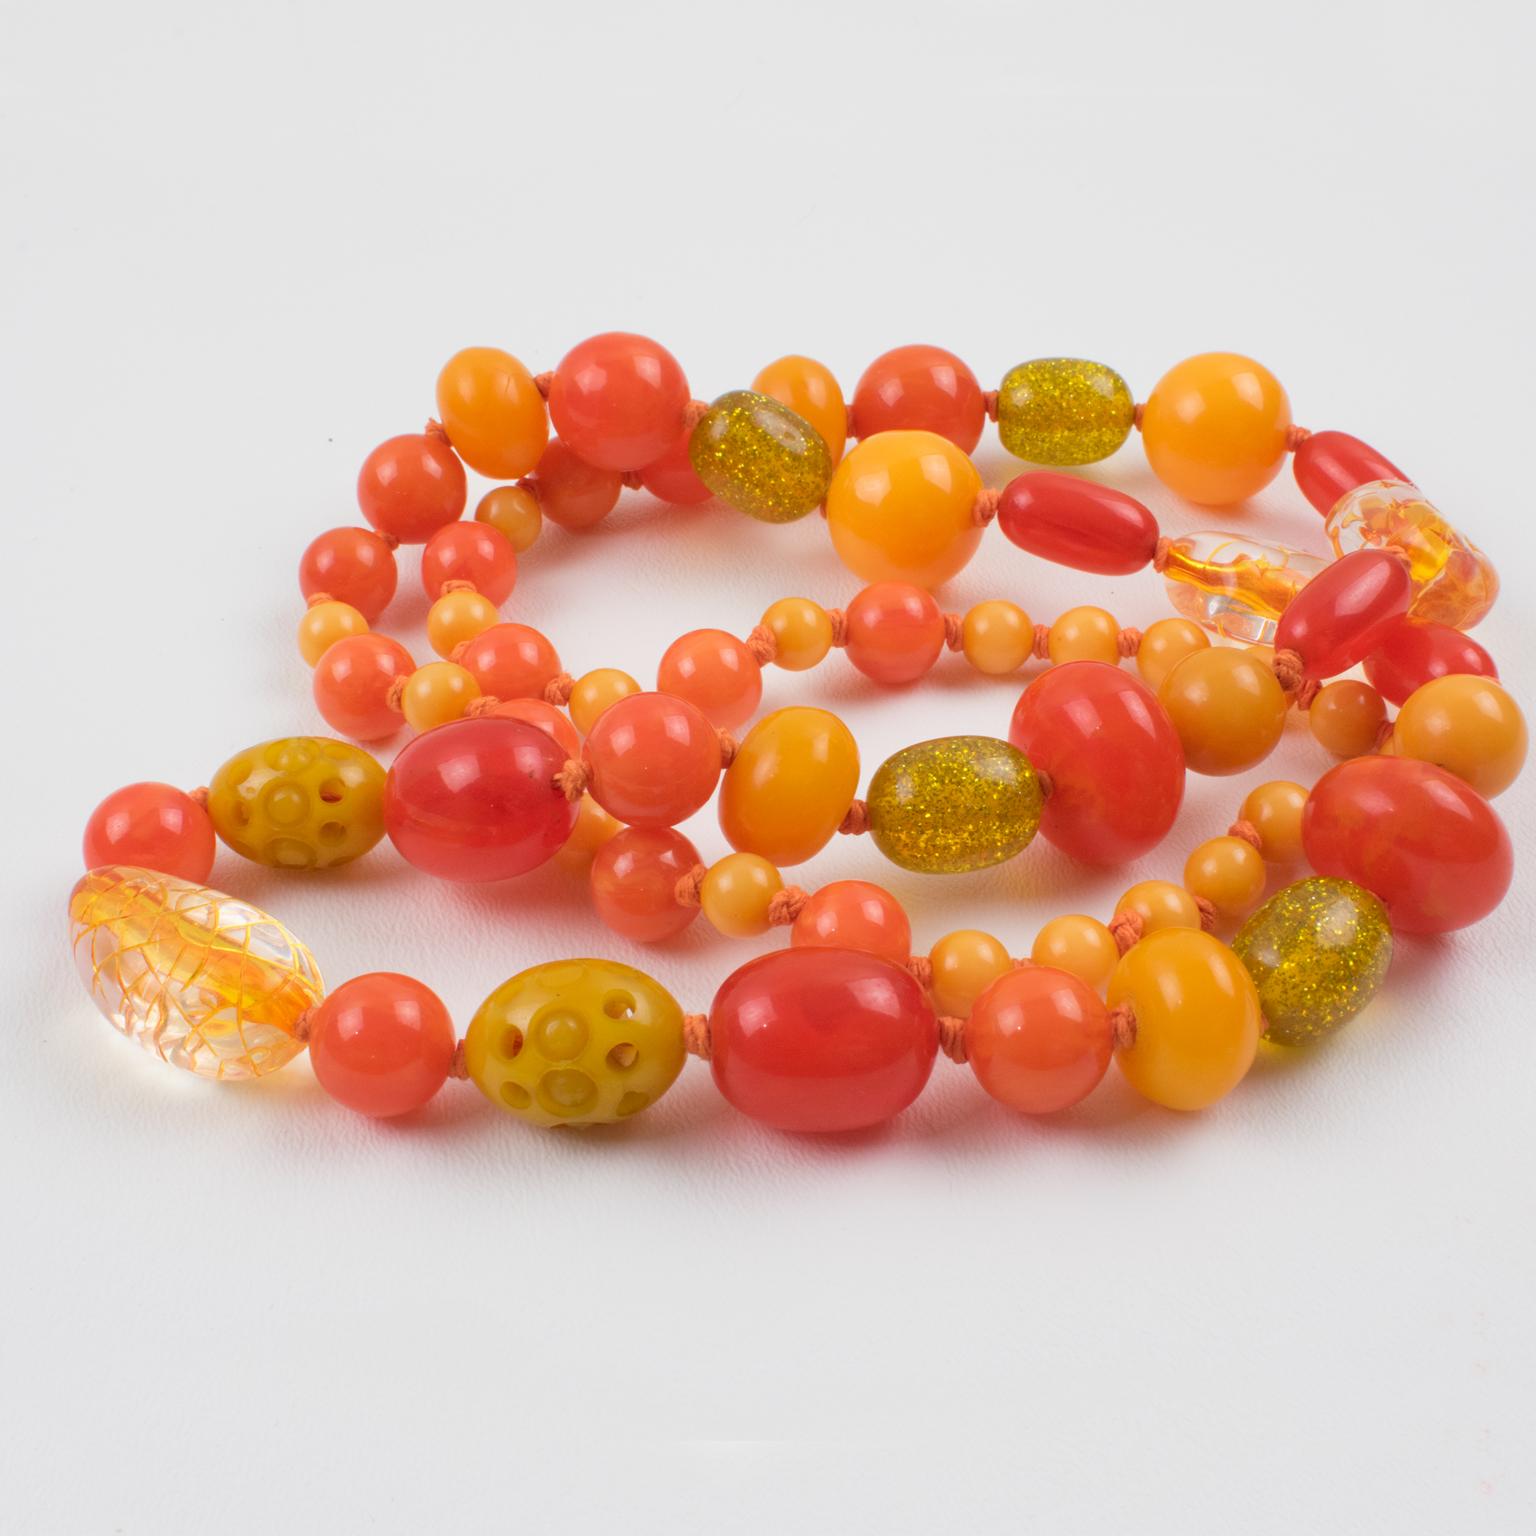 Bakelite and Lucite Long Necklace Sunny Yellow and Orange Colors For Sale 3